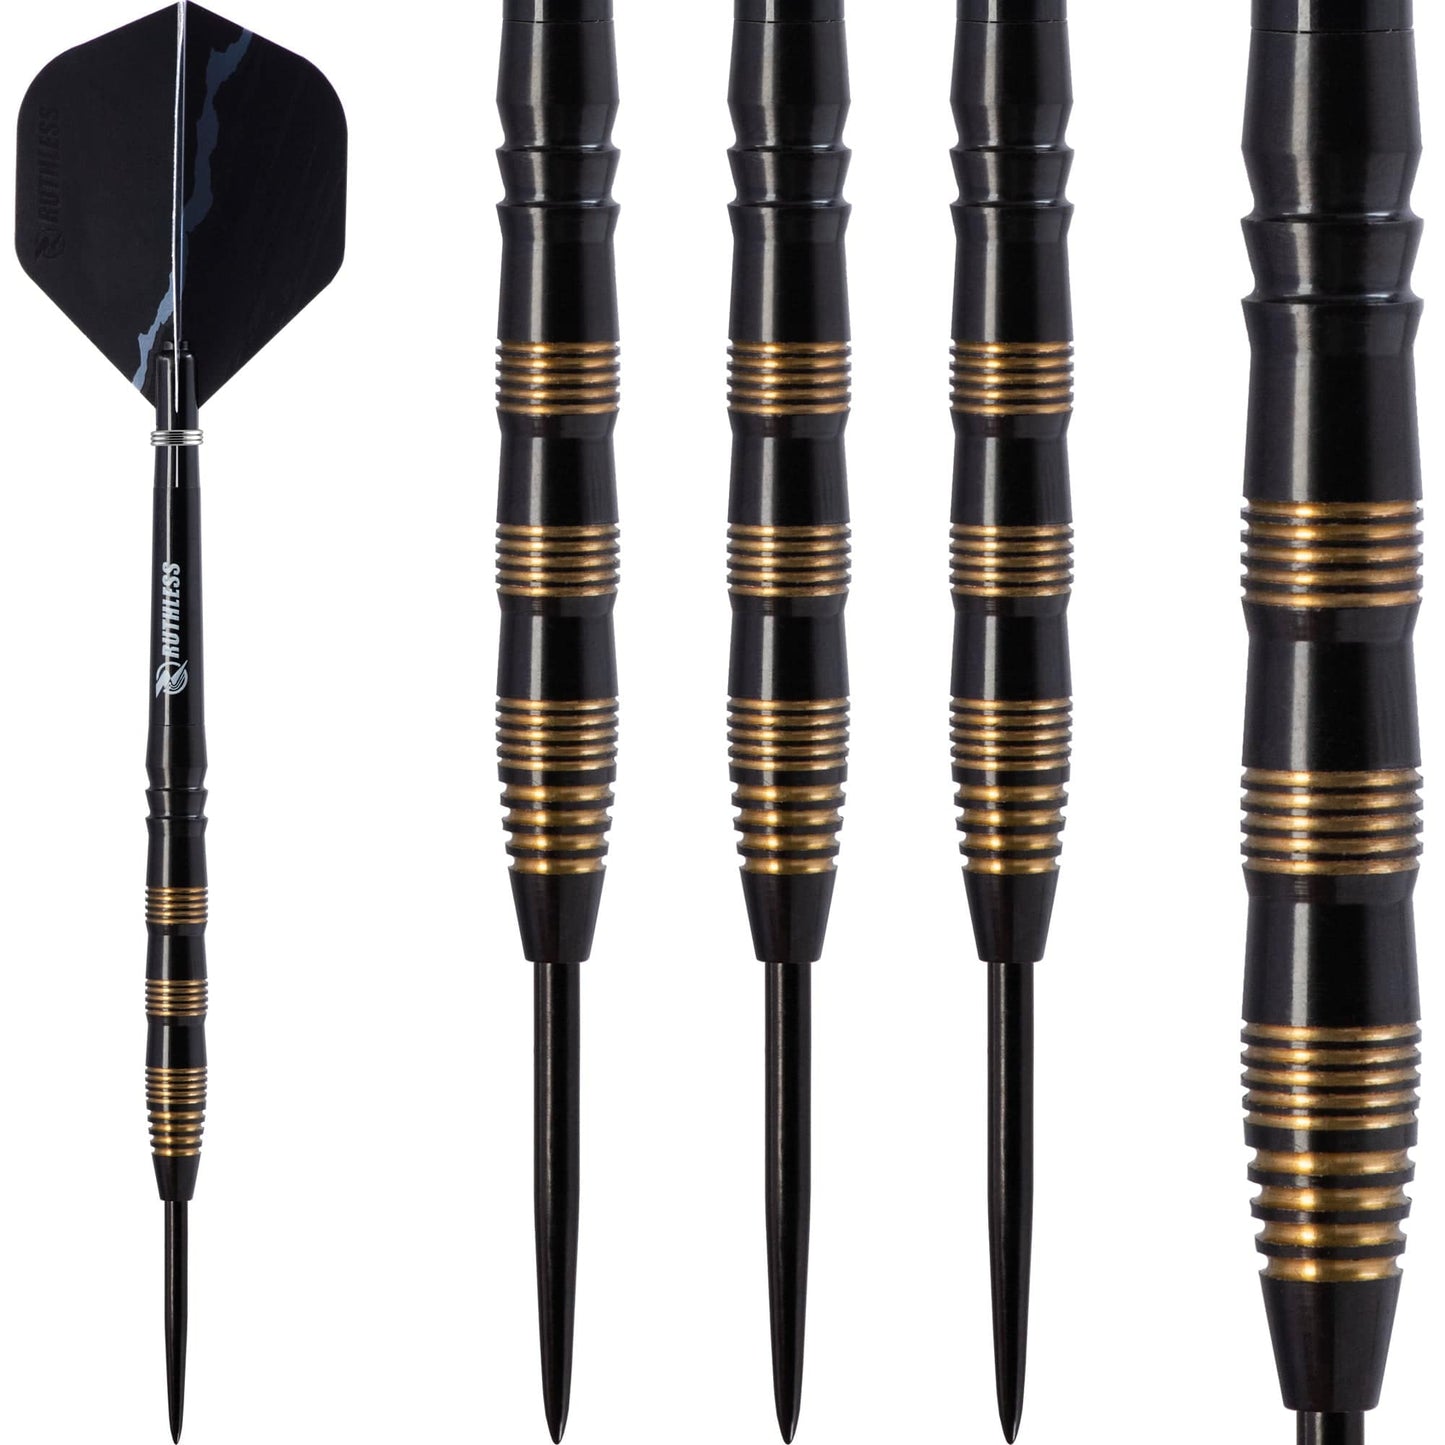 Ruthless Black Eagle Darts - Steel Tip Tungsten - Gold Ring